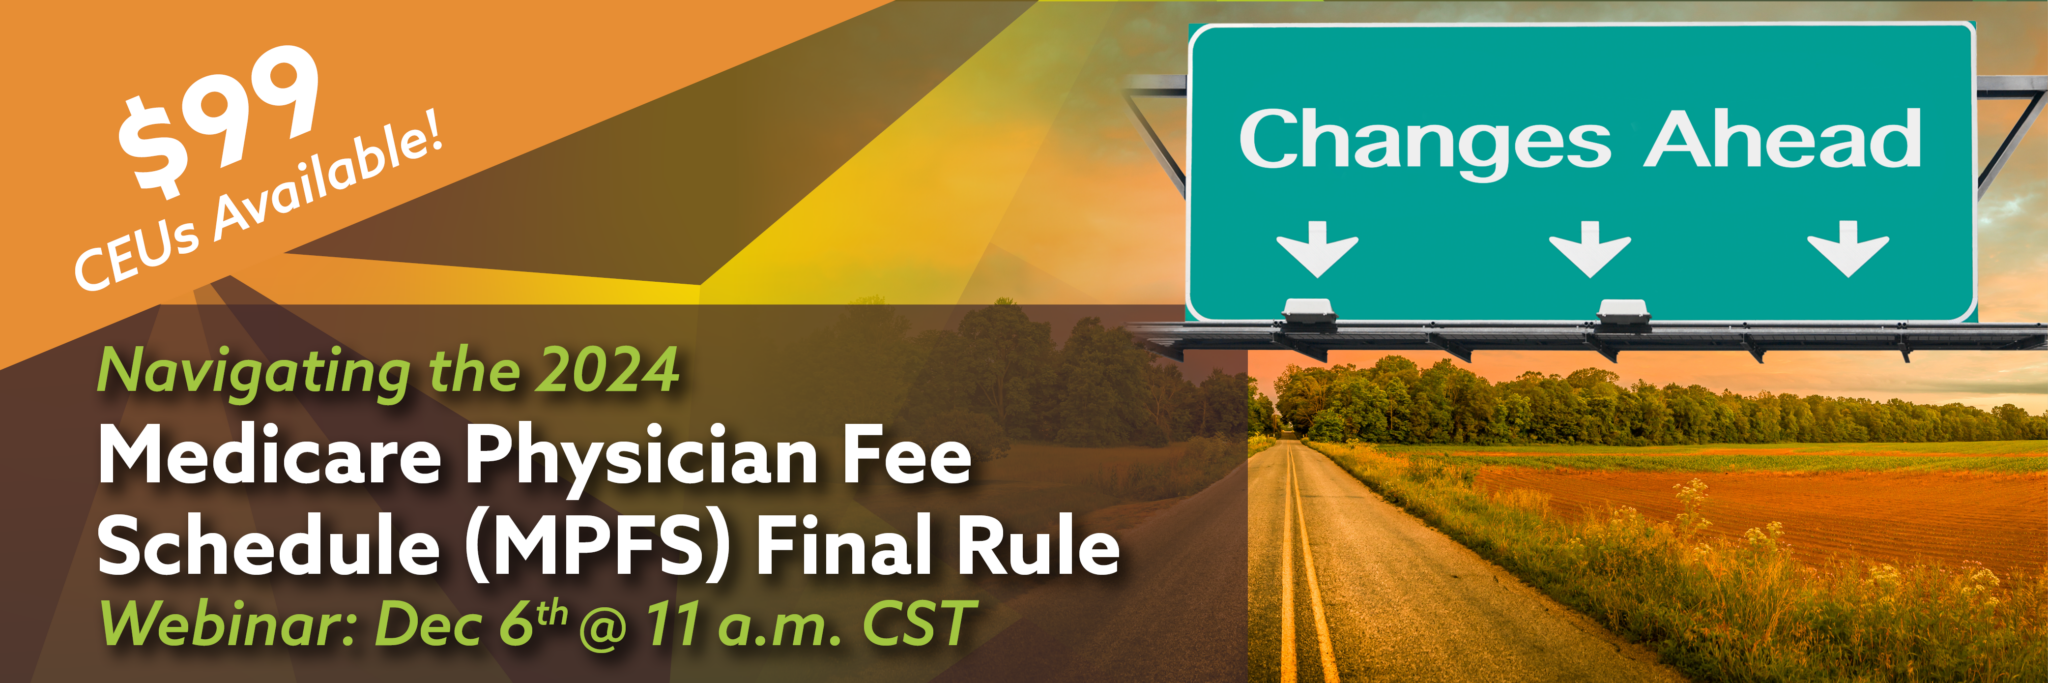 Webinar Navigating the 2024 Medicare Physician Fee Schedule (MPFS